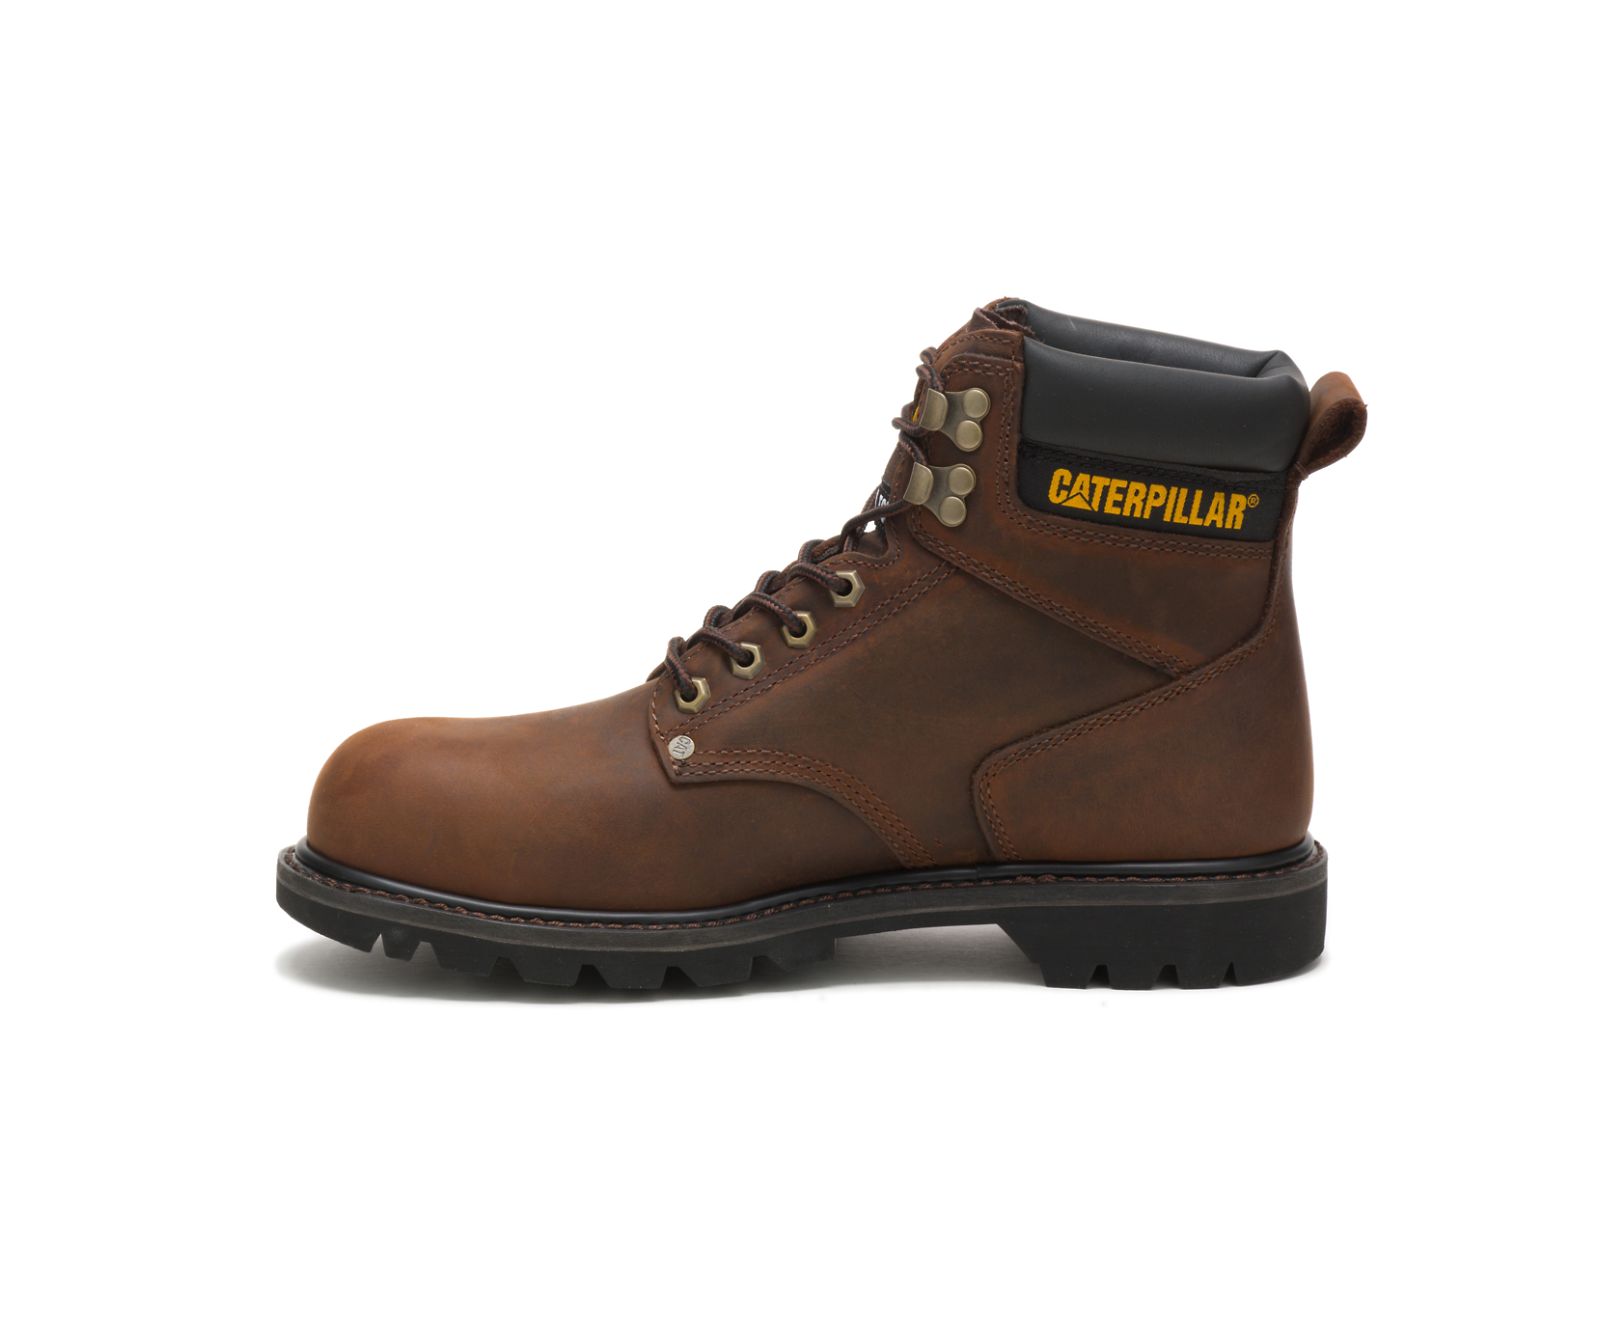 Second Shift Steel Toe Work Boots